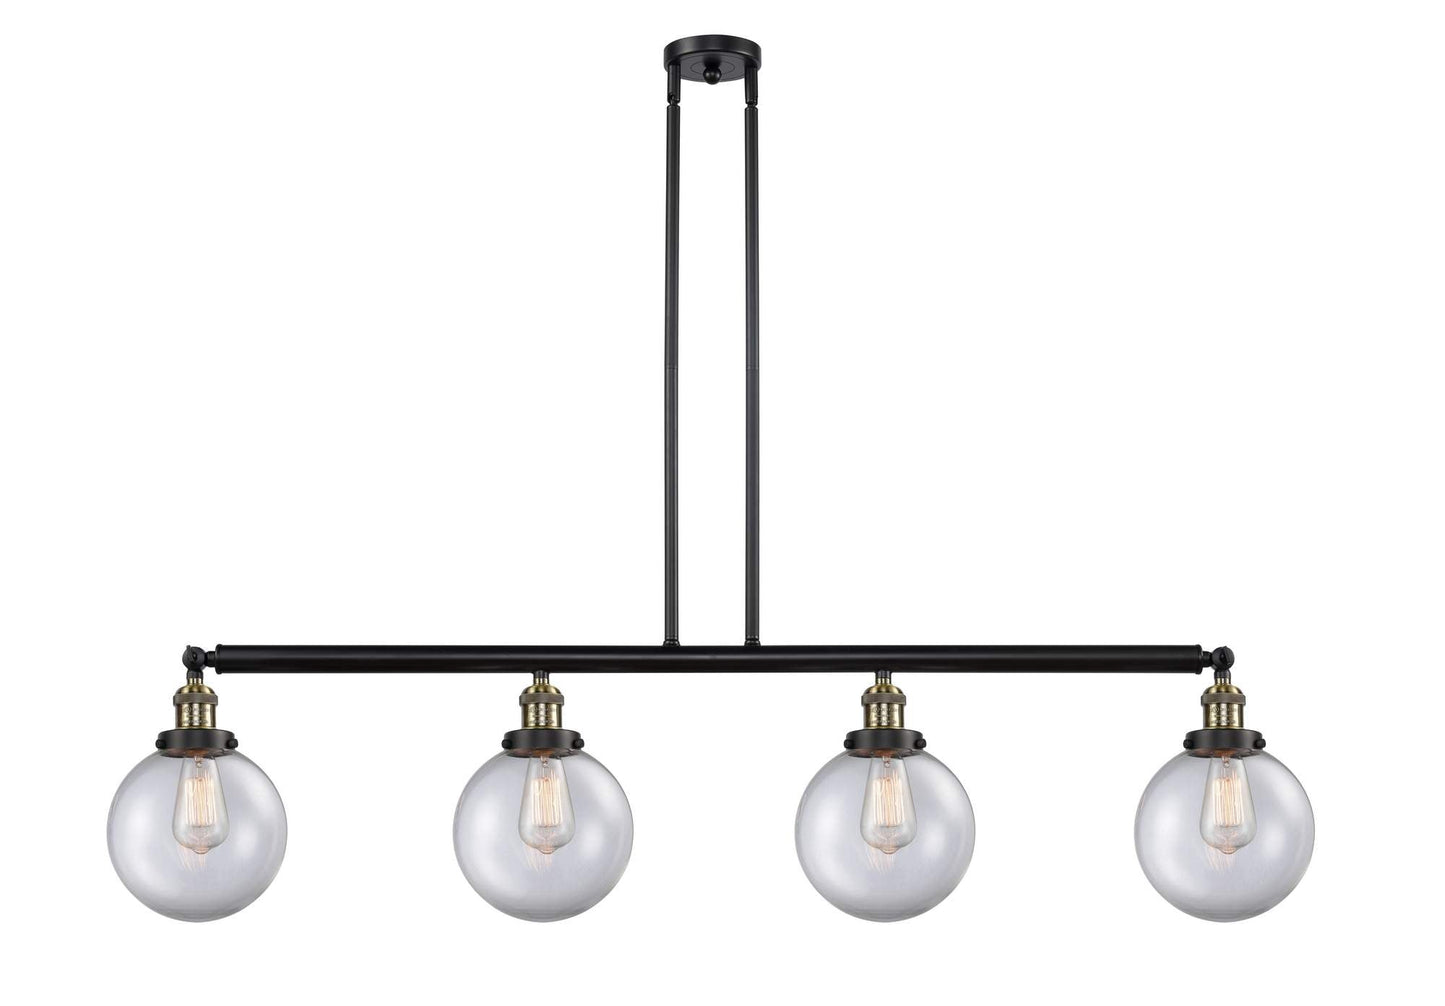 214-BAB-G202-8 4-Light 52.625" Black Antique Brass Island Light - Clear Beacon Glass - LED Bulb - Dimmensions: 52.625 x 8 x 12.875<br>Minimum Height : 22<br>Maximum Height : 46 - Sloped Ceiling Compatible: Yes